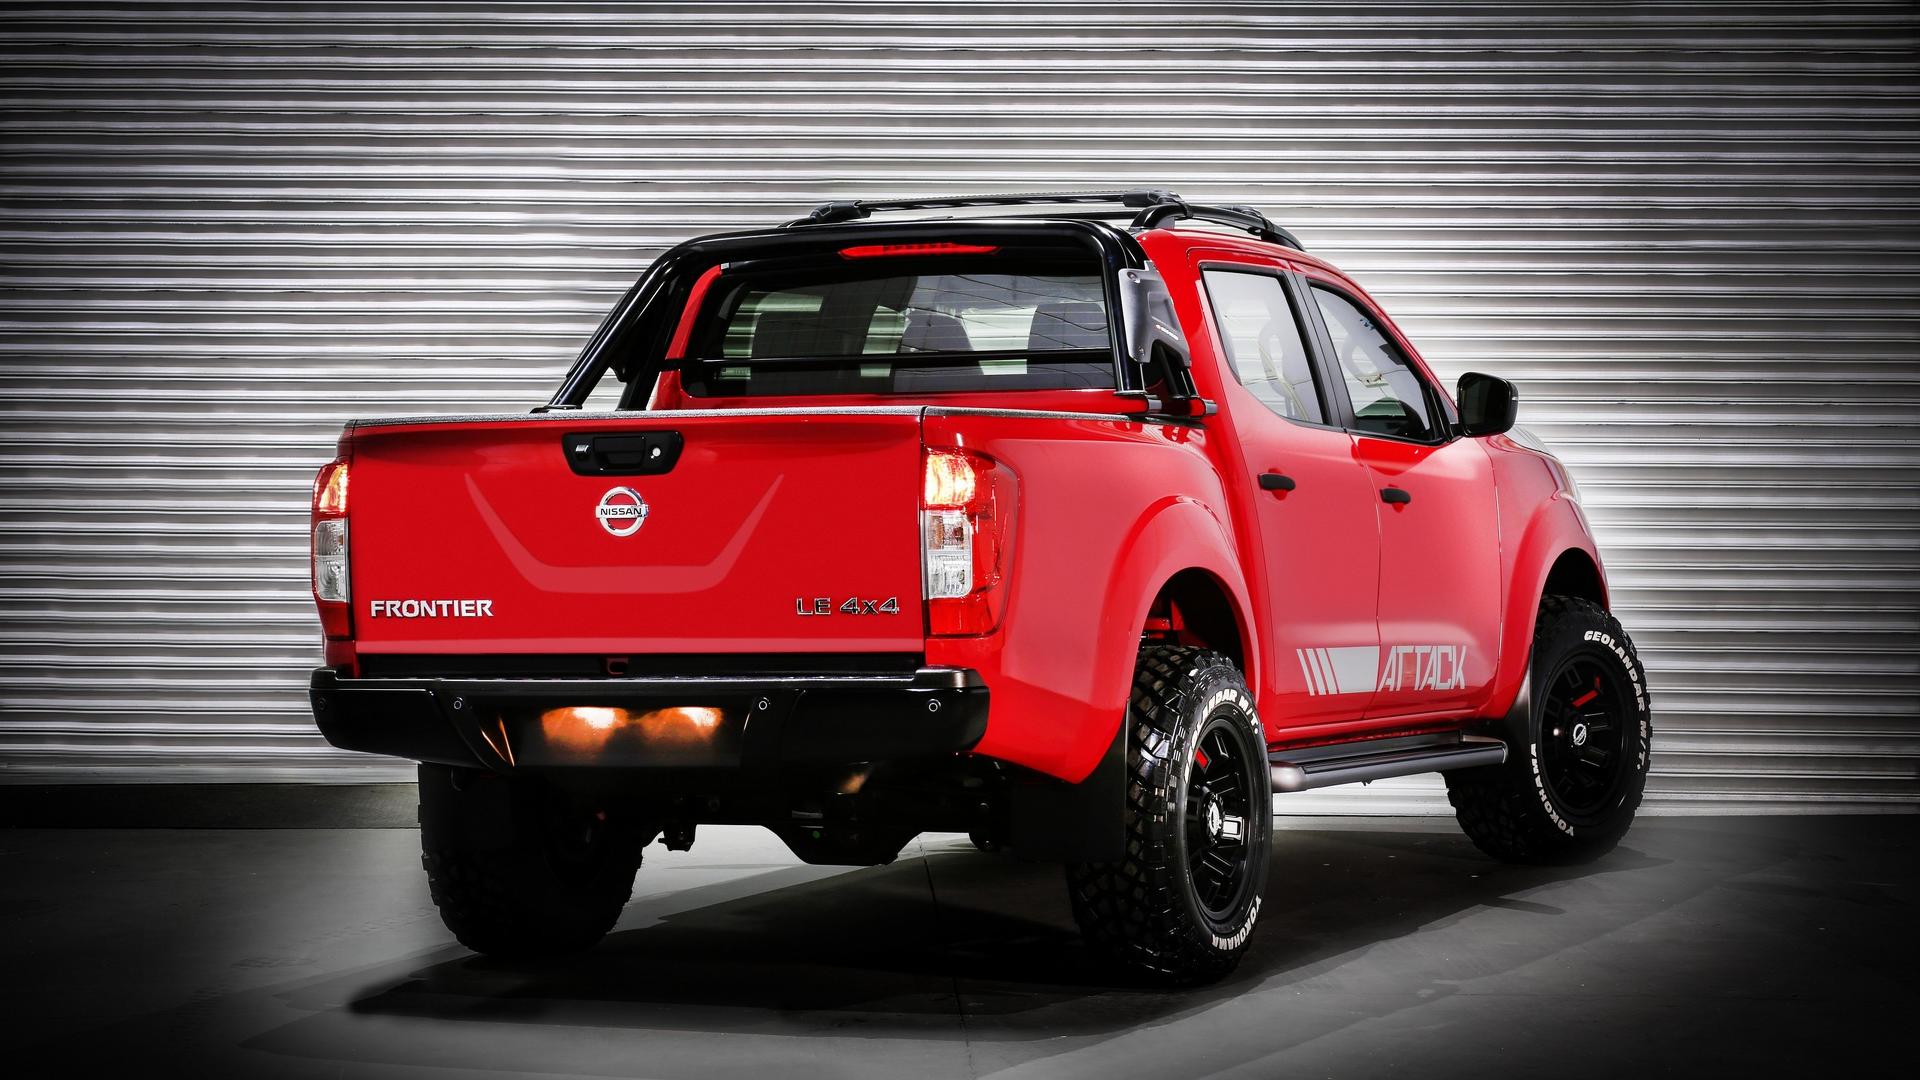 Nissan Frontier Gets The Attack Concept Treatment In Latin